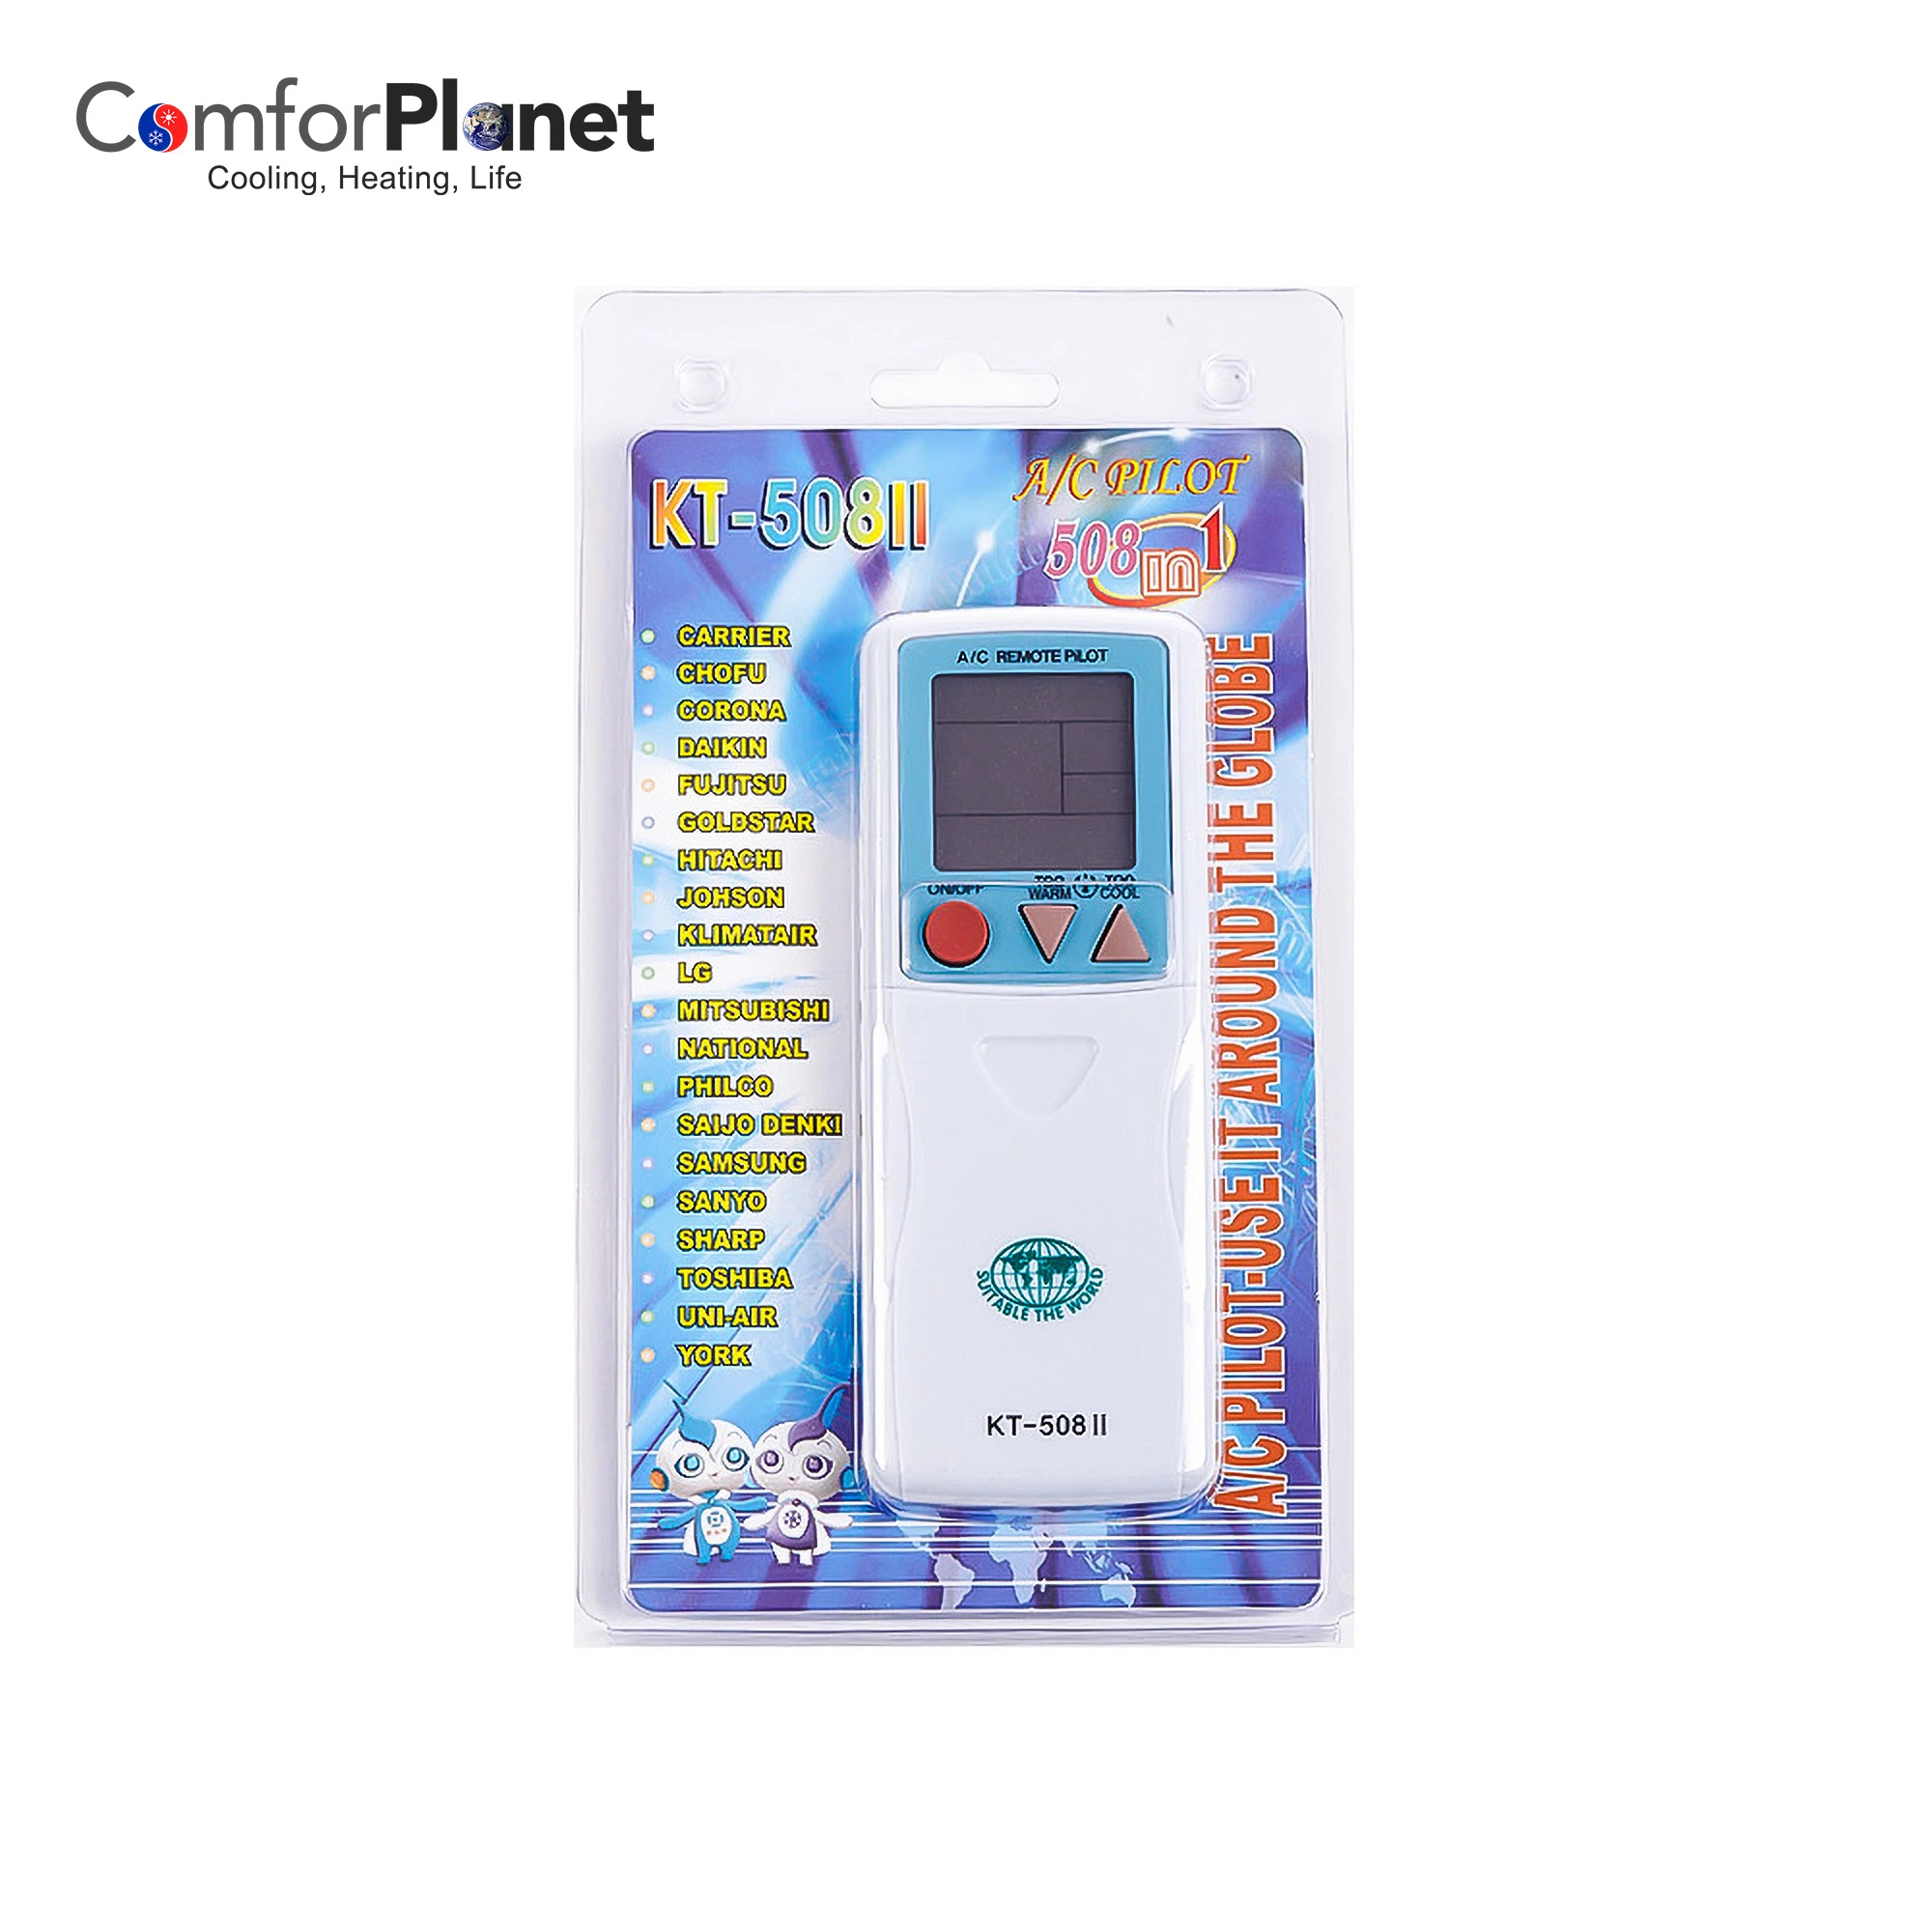 Factory Price Air Conditioner A/C Remote Control Kt-508